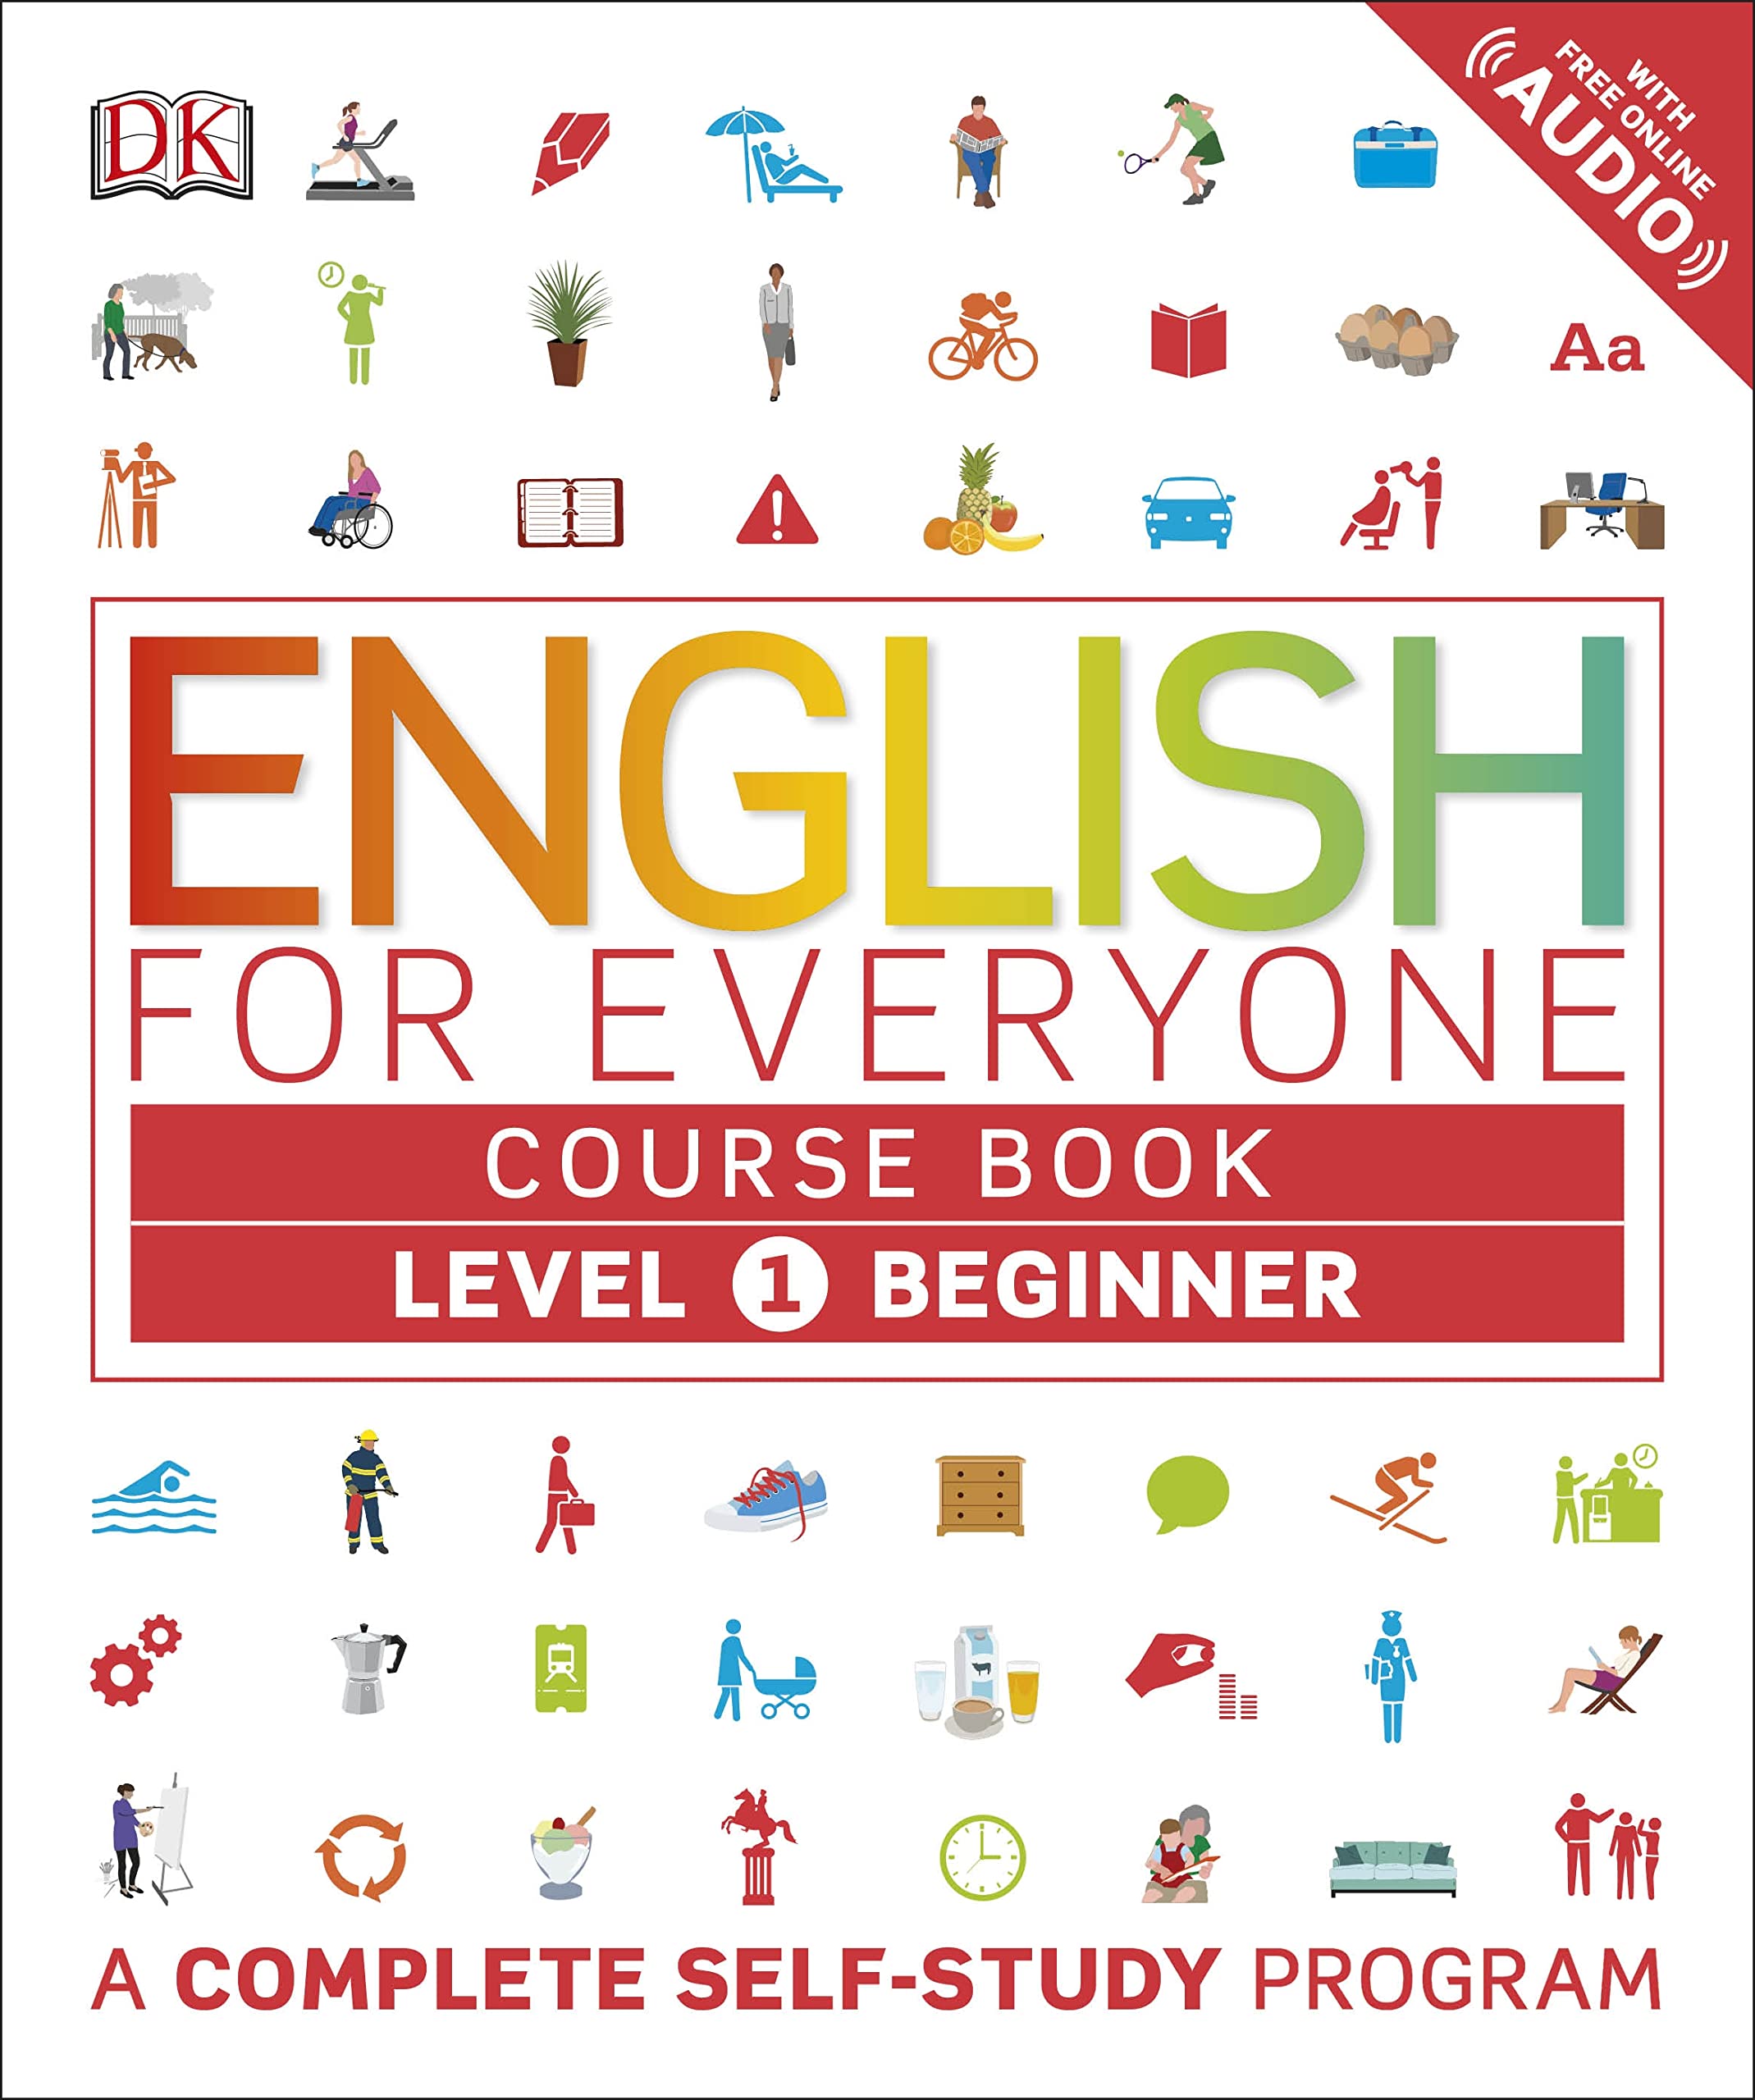 English for Everyone: Level 1 Course Book - Beginner English SureShot Books